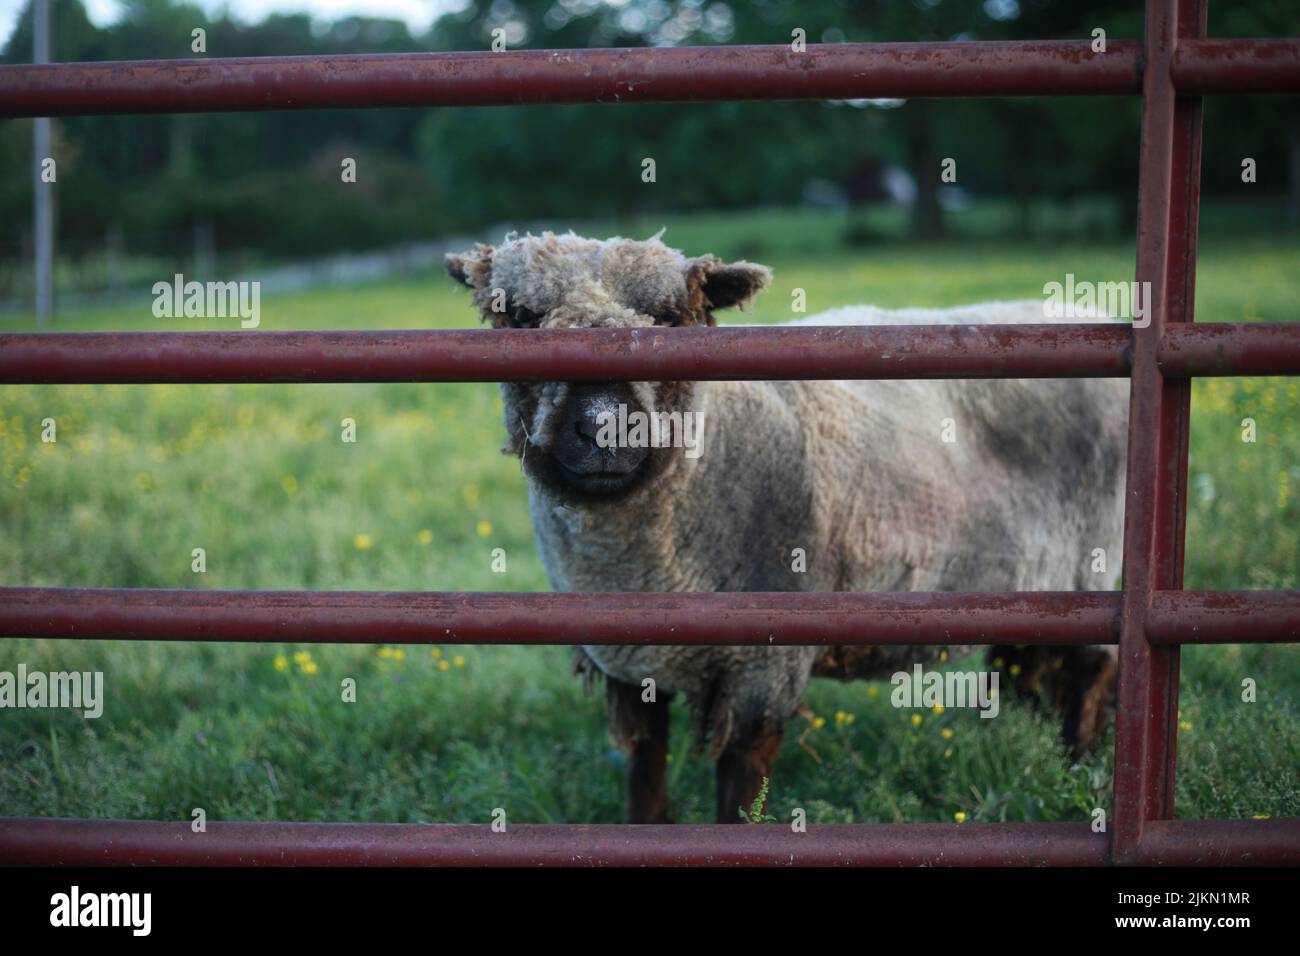 A shy sheep in beautifully green pasture stands looking straight at camera with its eyes covered by a horizontal fence bar. Stock Photo